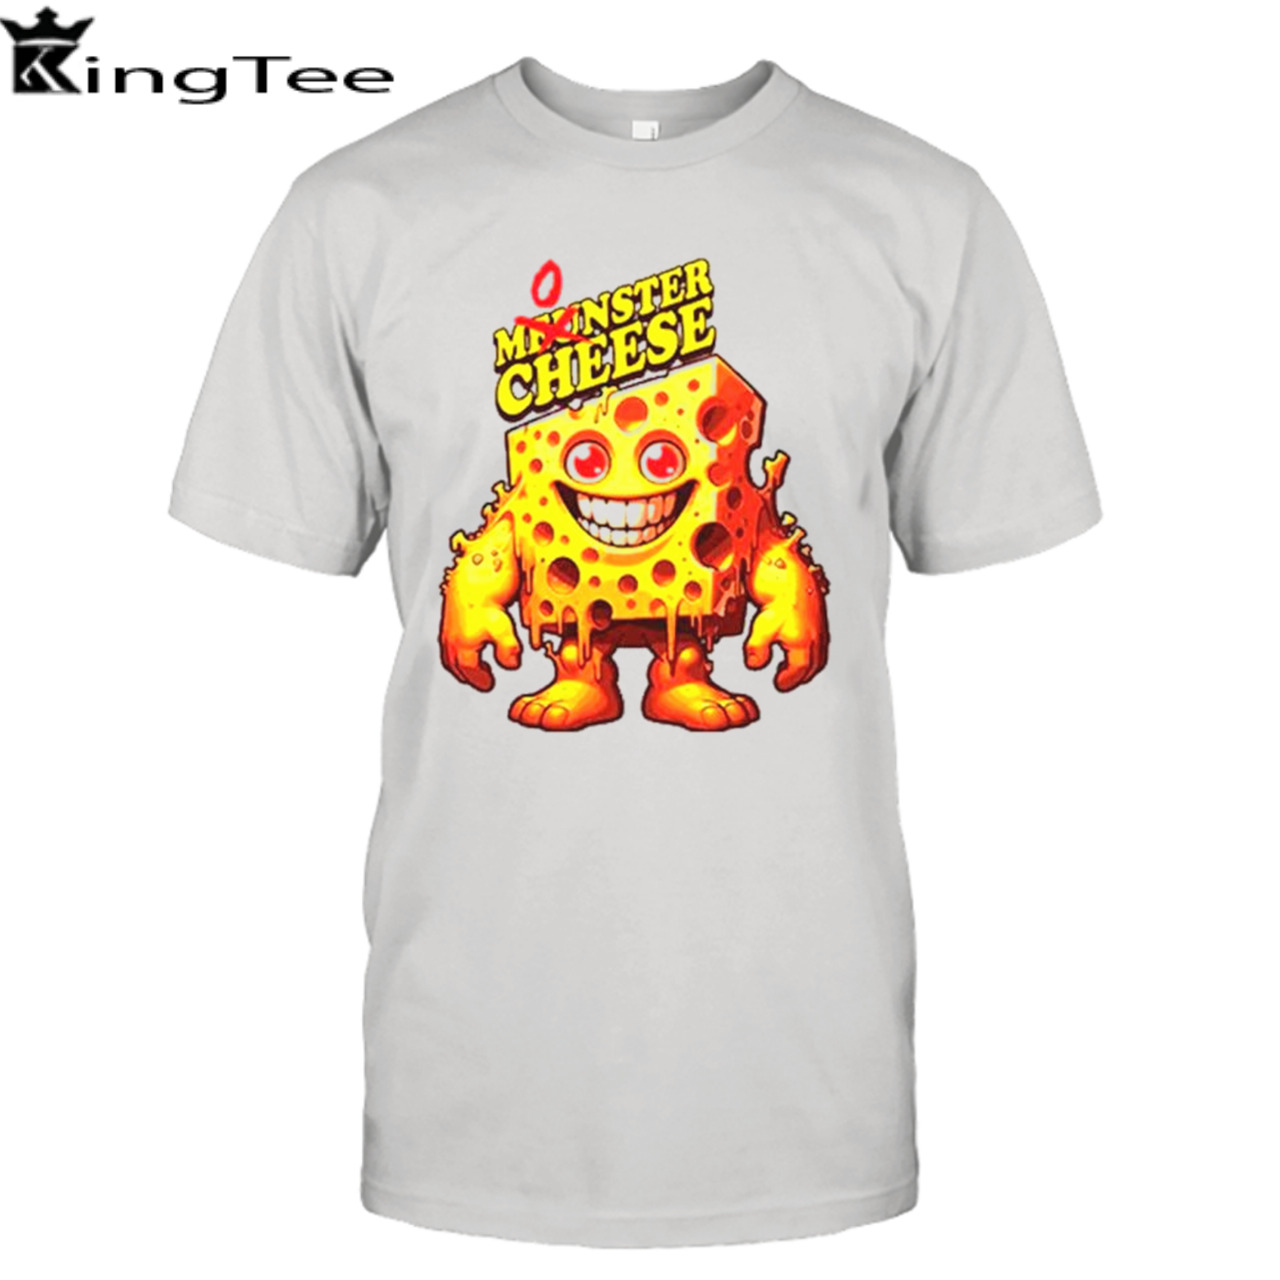 Monster Cheese funny shirt